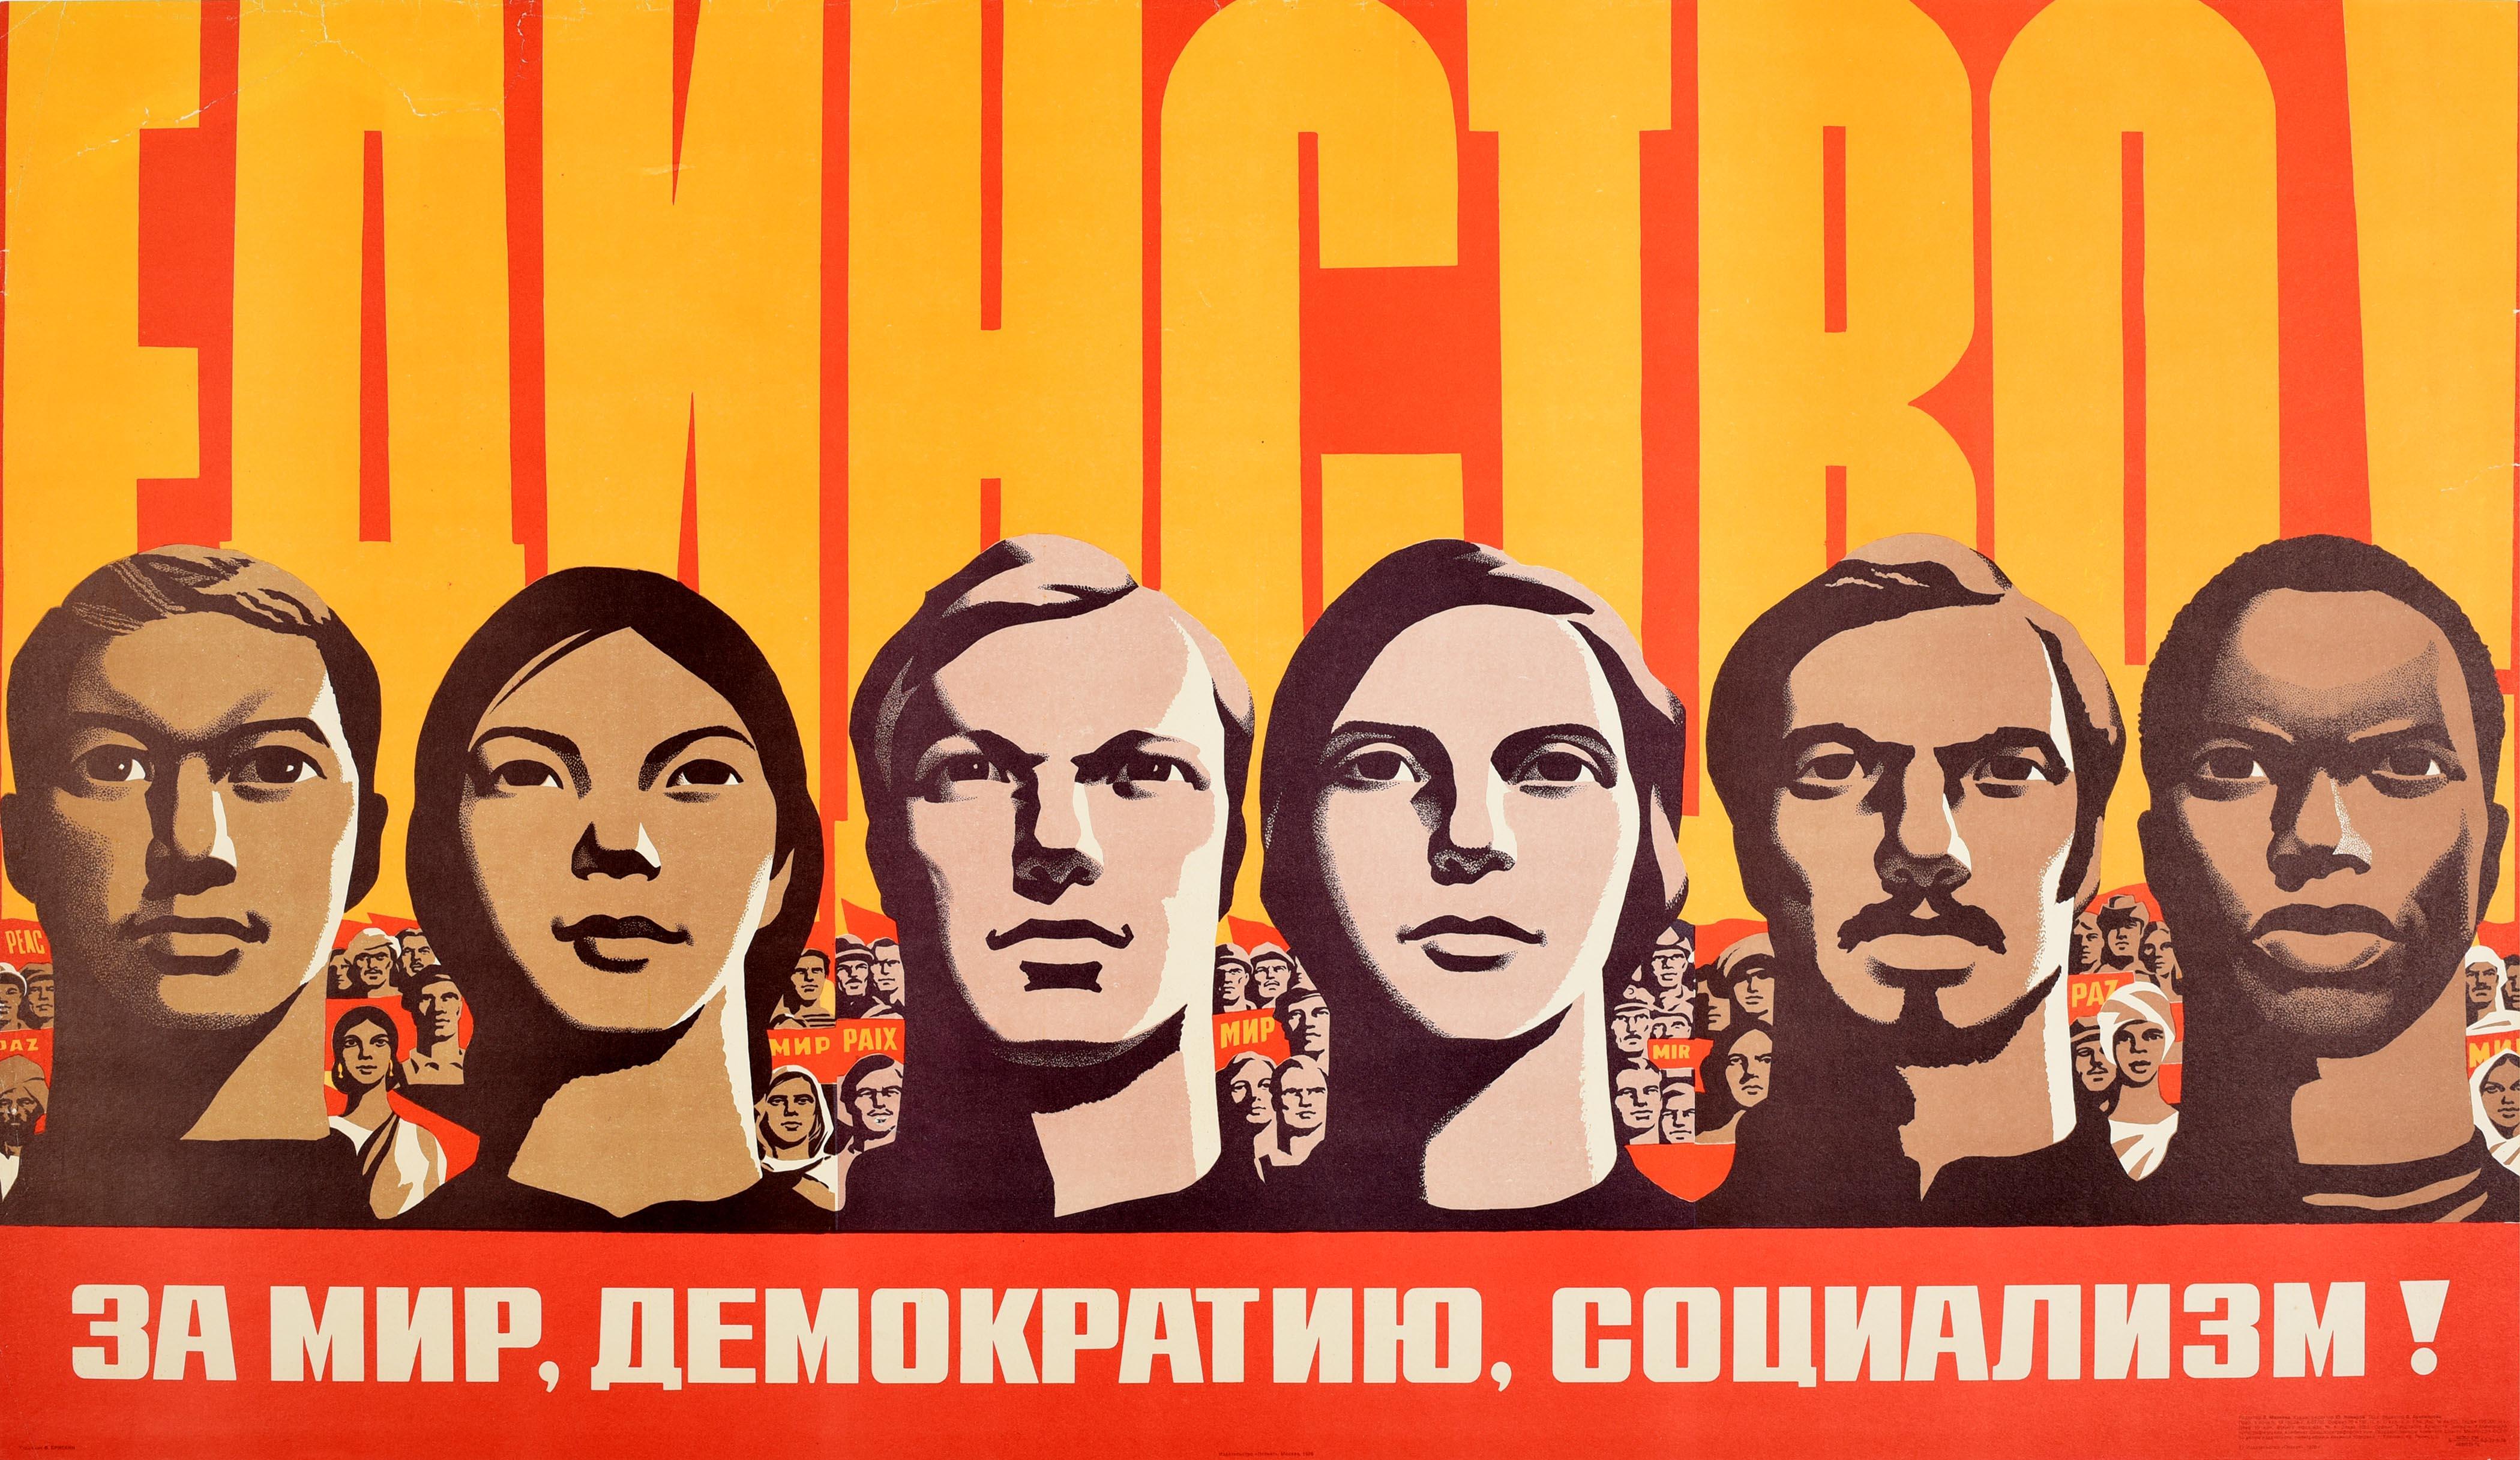 Original vintage Soviet propaganda poster - Unity! For Peace, Democracy, Socialism! / ????????! ?? ???, ??????????, ?????????! - featuring a dynamic design showing people from around the world holding banners reading Peace in different languages